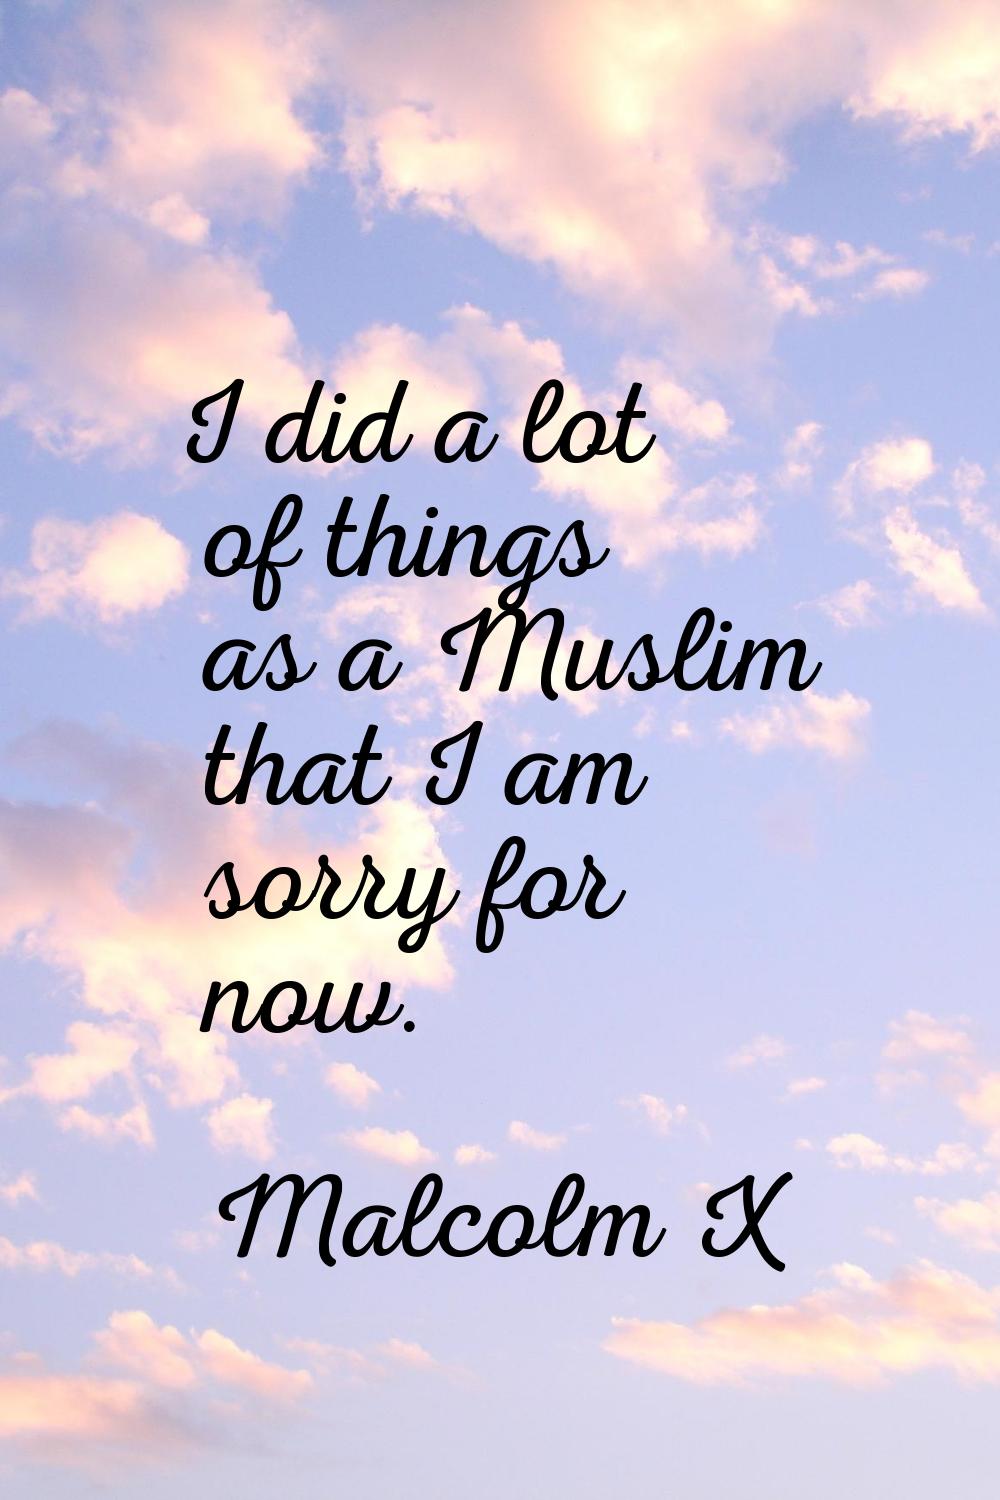 I did a lot of things as a Muslim that I am sorry for now.